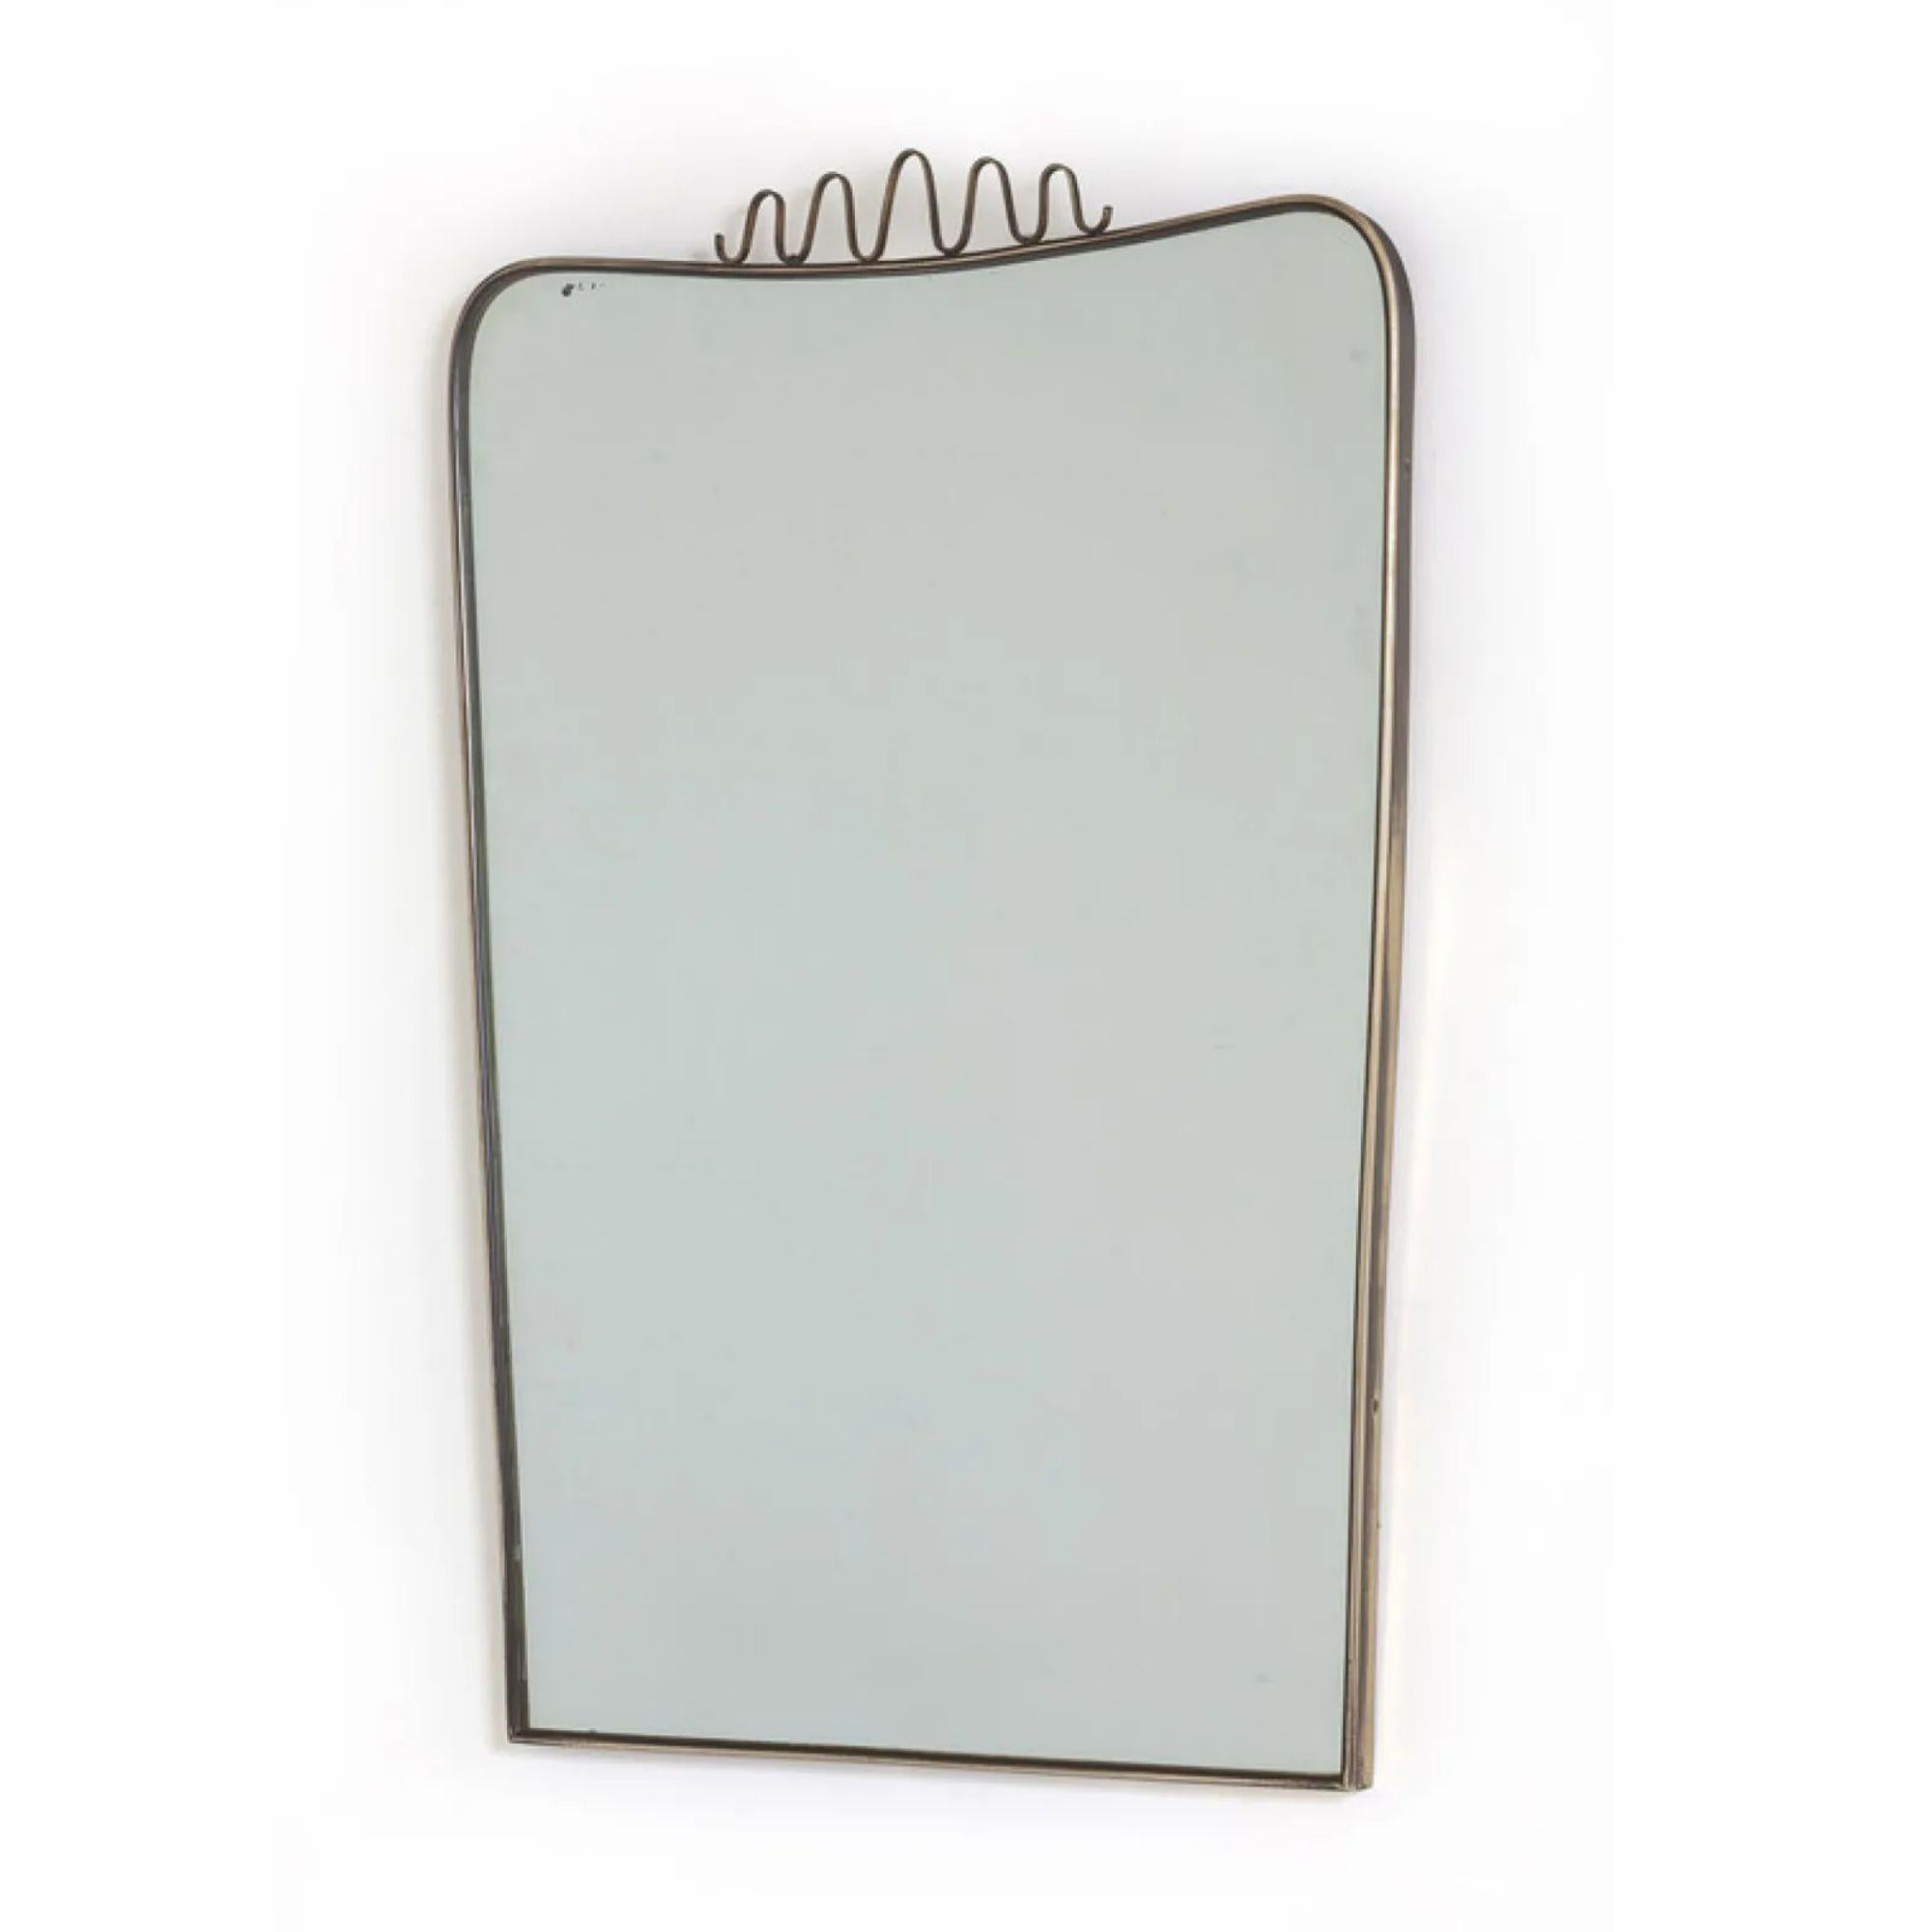 Gilt Italian Brass Mirror in The Style of Gio Ponti, 1950s For Sale